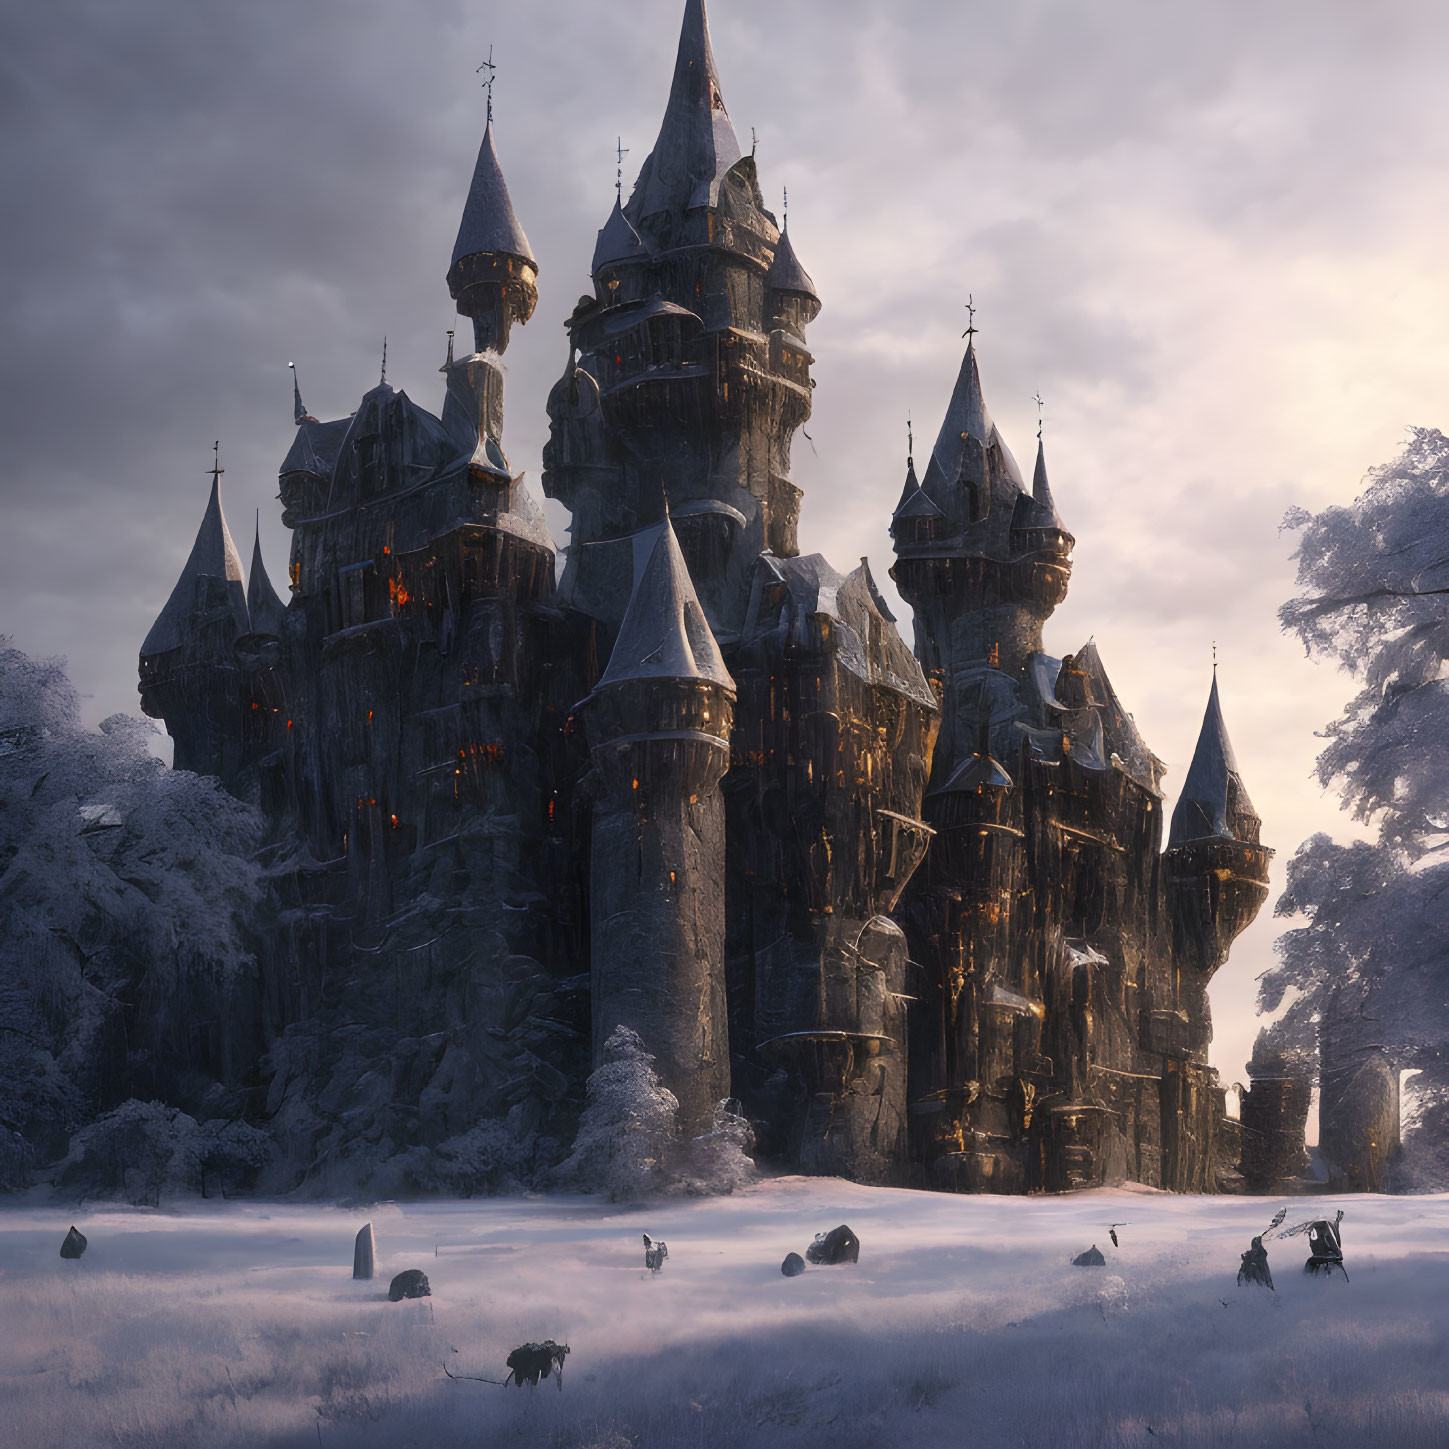 Majestic fantasy castle in snowy landscape with horseback riders and wolf